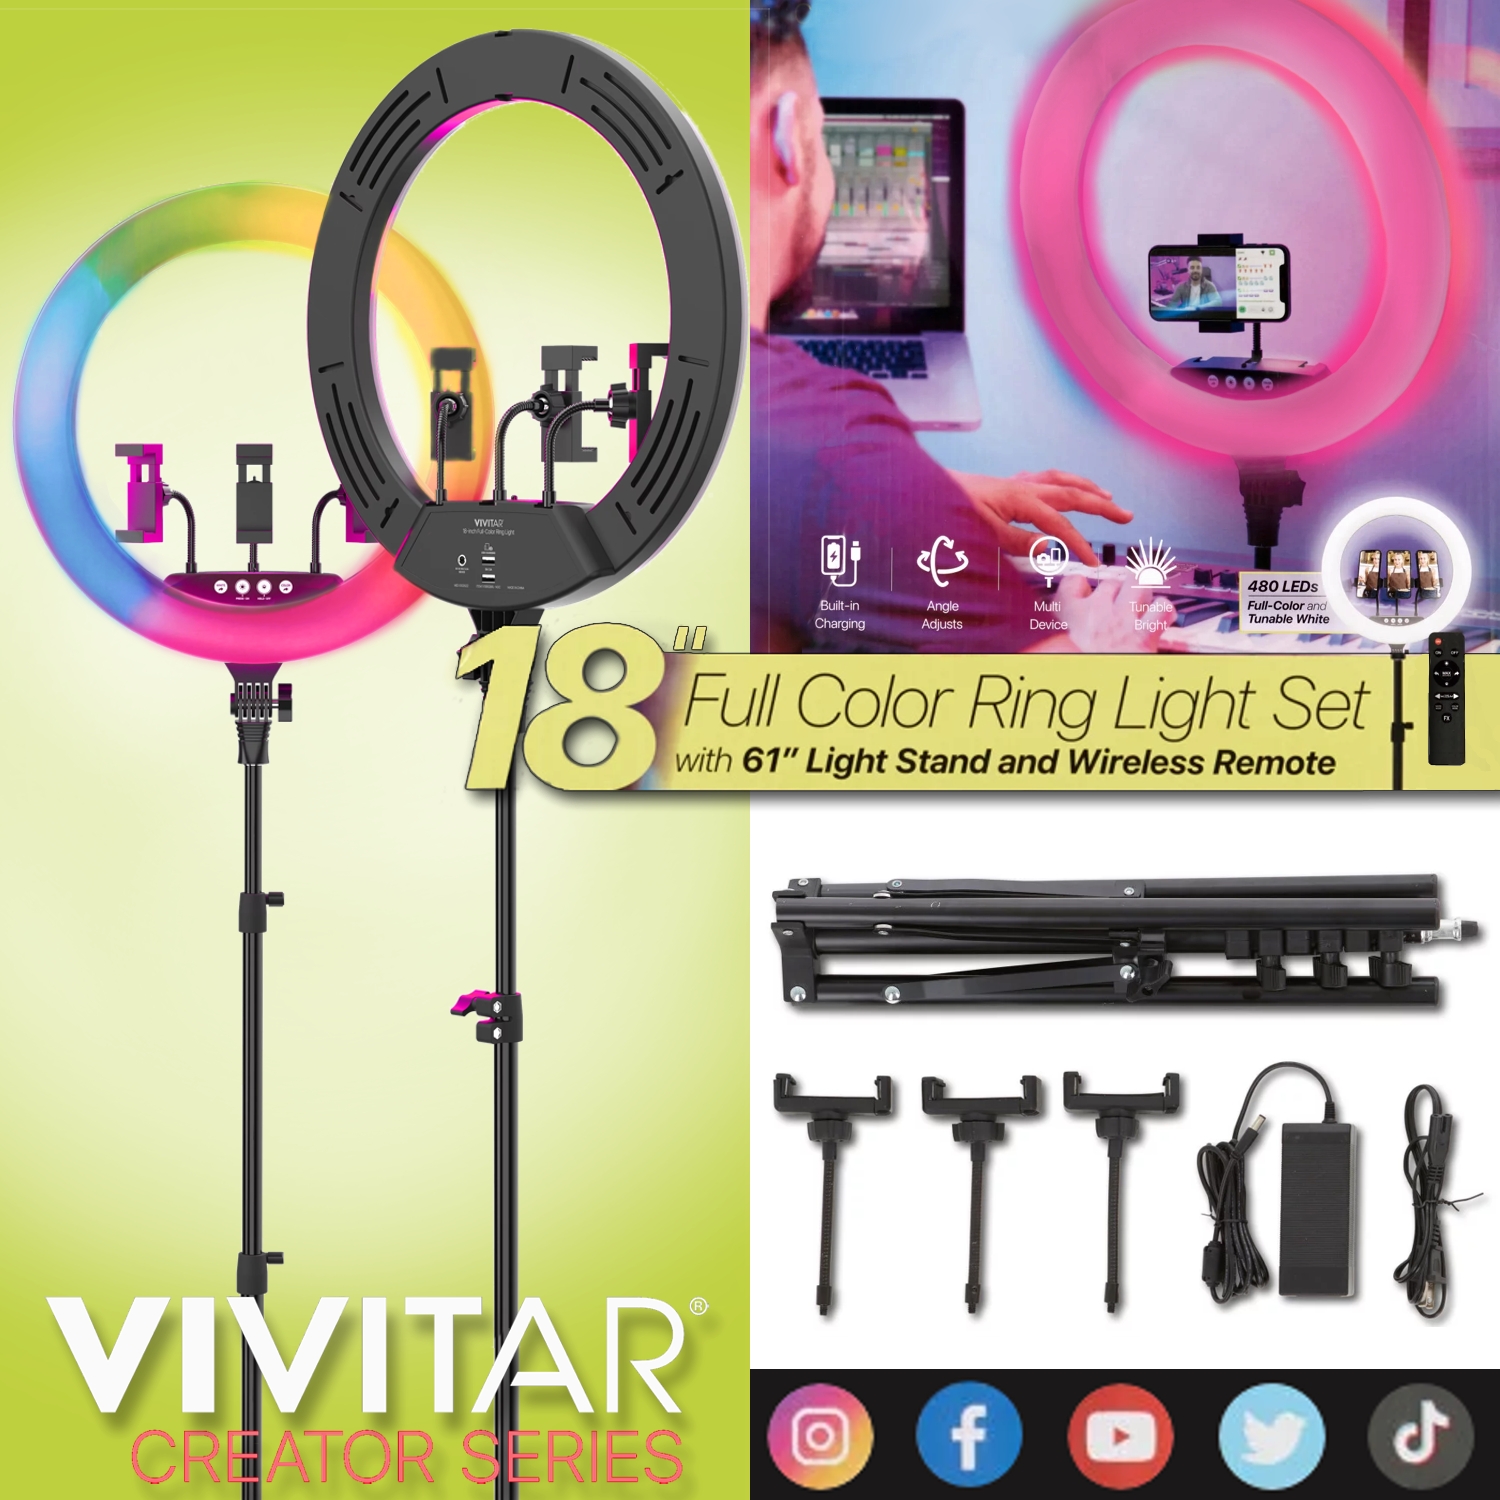 Vivitar 18" LED RGB Ring Light with Tripod, Phone Holder USB Charging Ports, and Wireless Remote - image 1 of 13